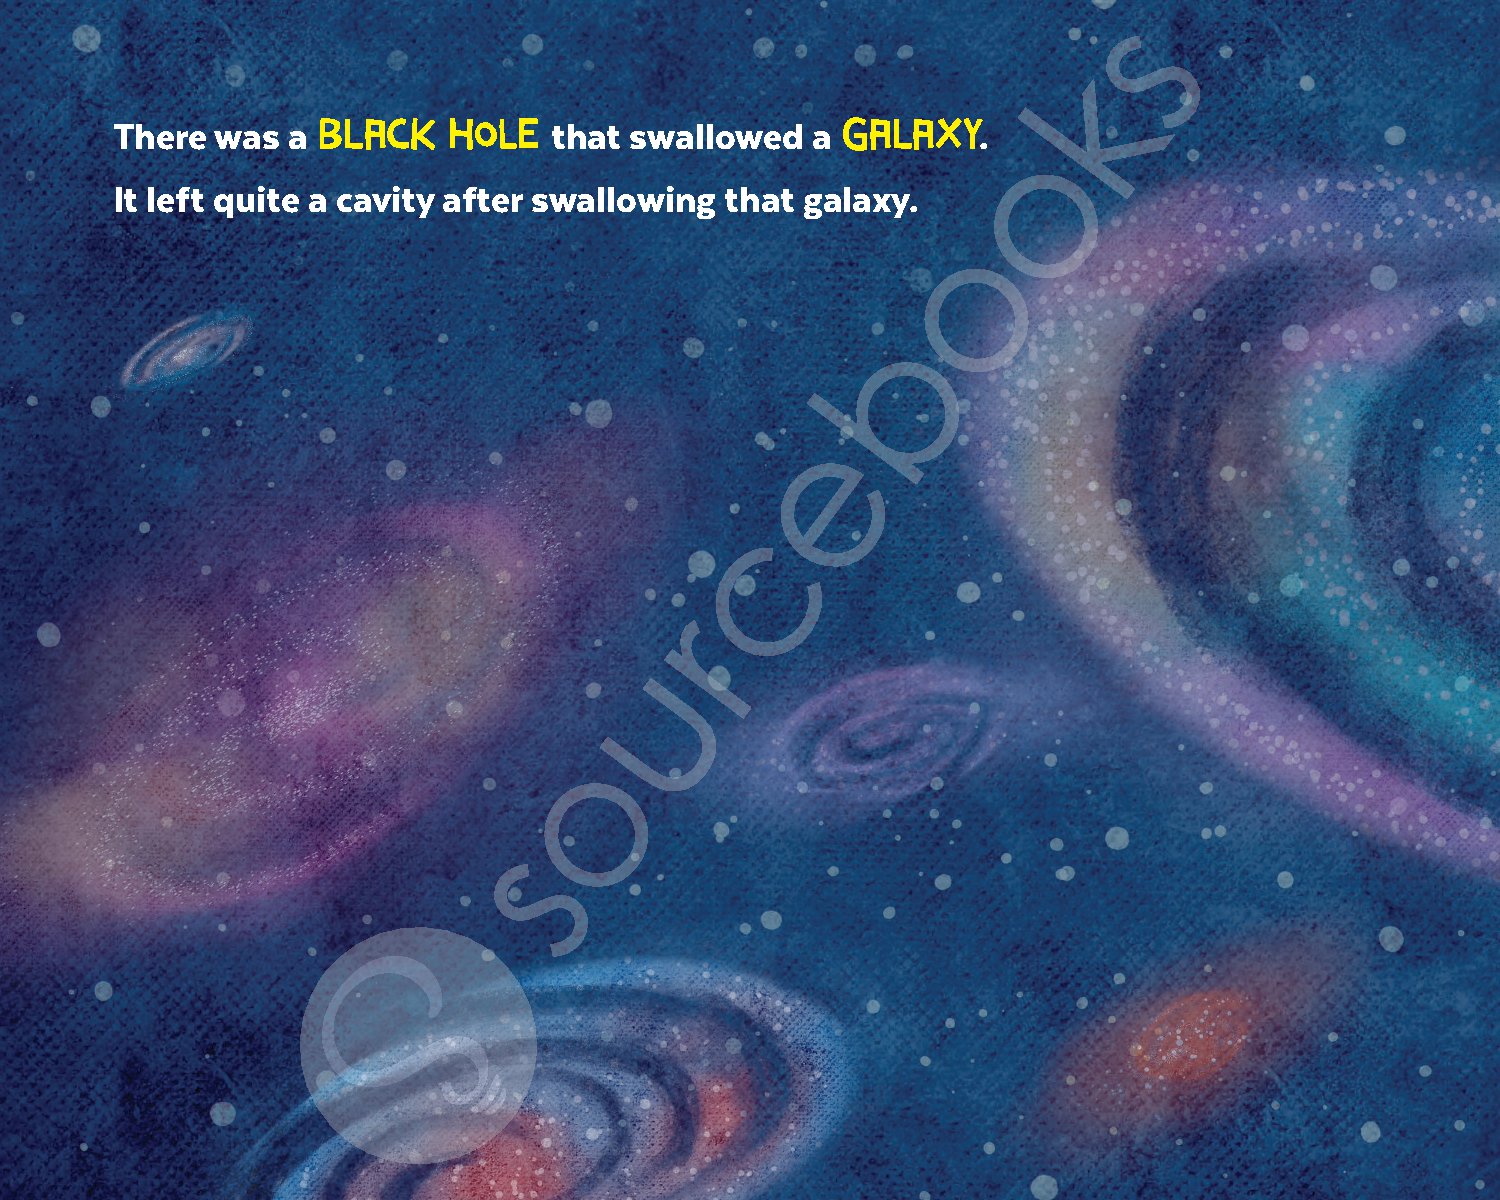 There Was a Black Hole that Swallowed the Universe